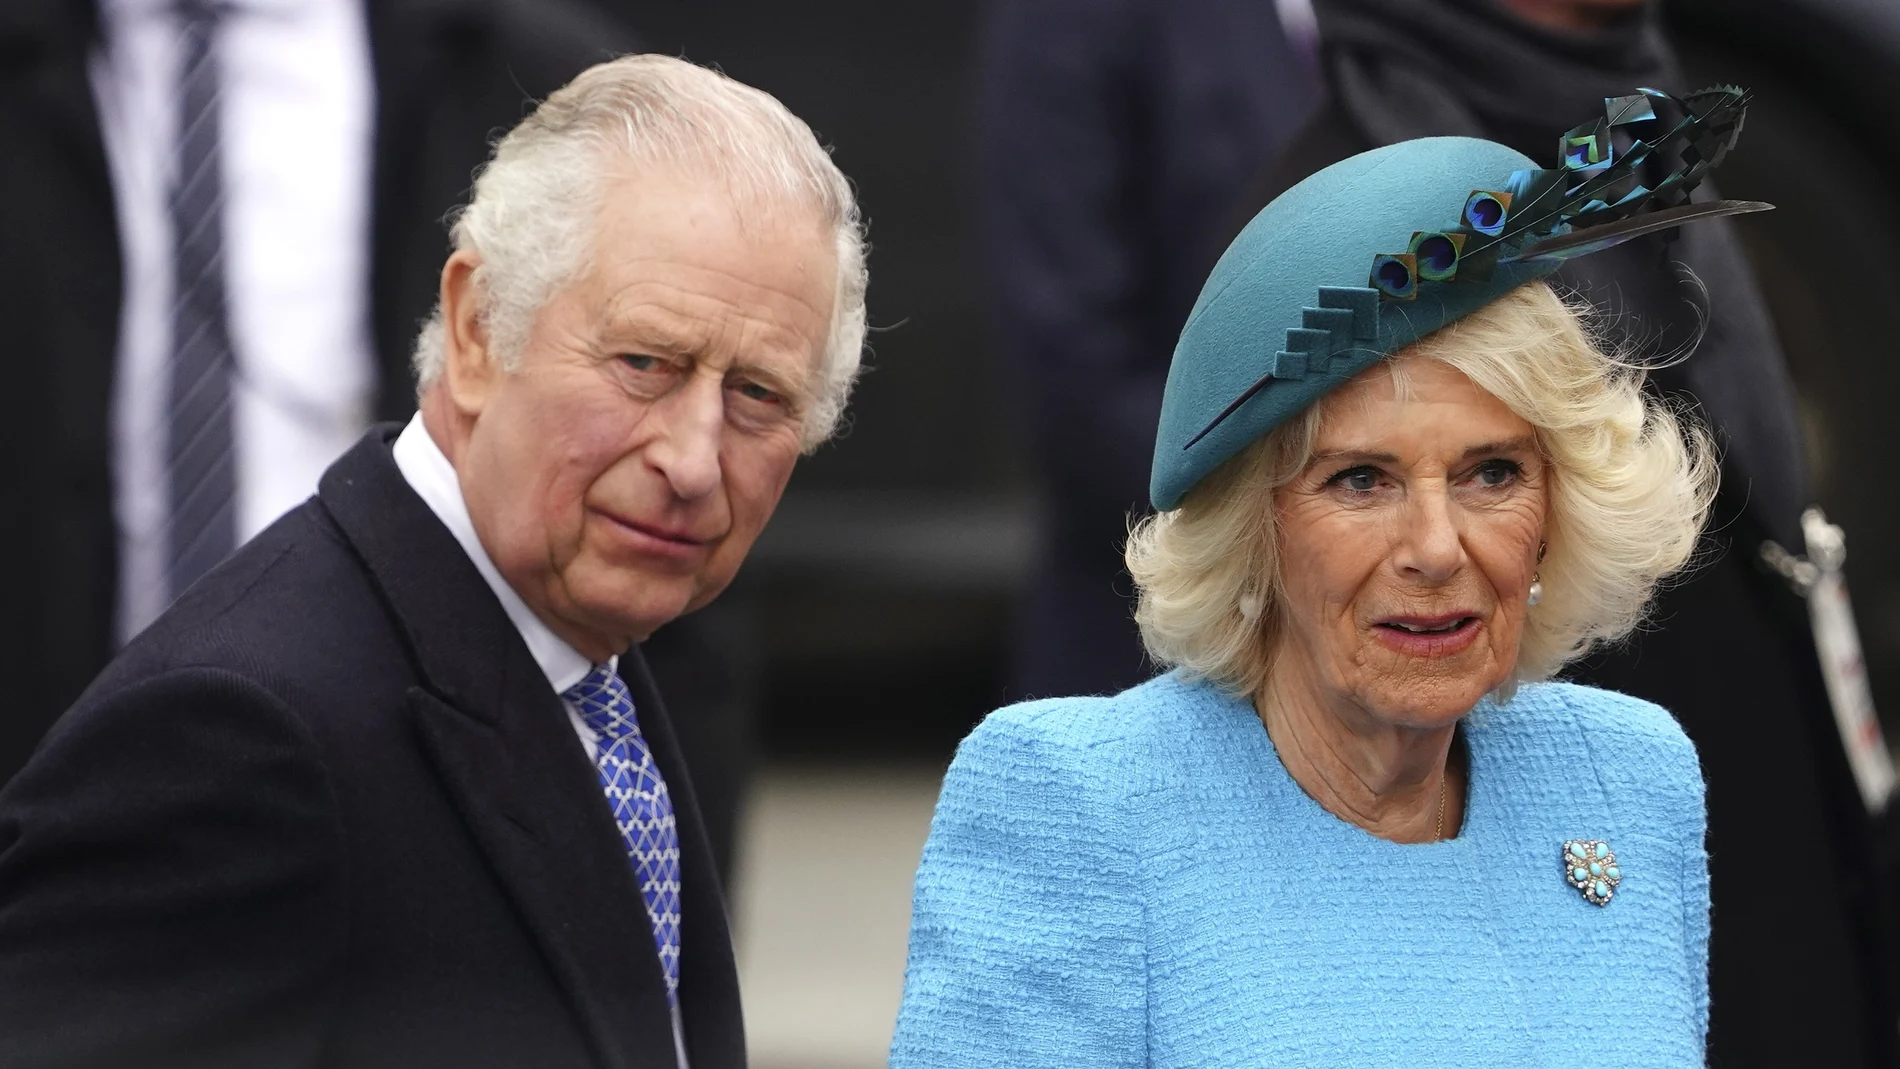 Britain's King Charles III (L) and Camilla, The Queen Consort in front of the Brandenburger Gate in Berlin, Germany